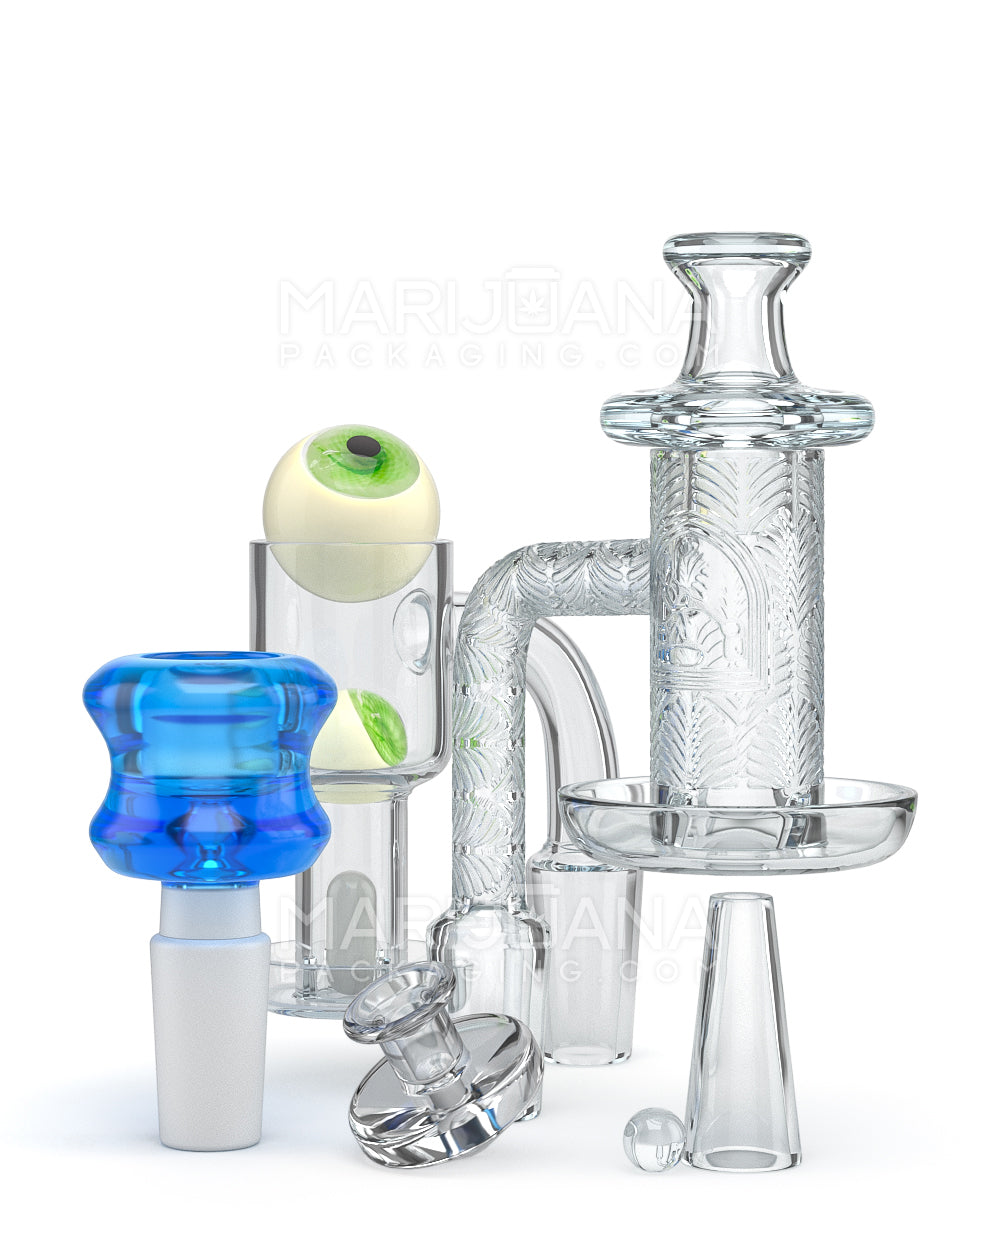 Bong Bowl and Slide Attachments for Sale